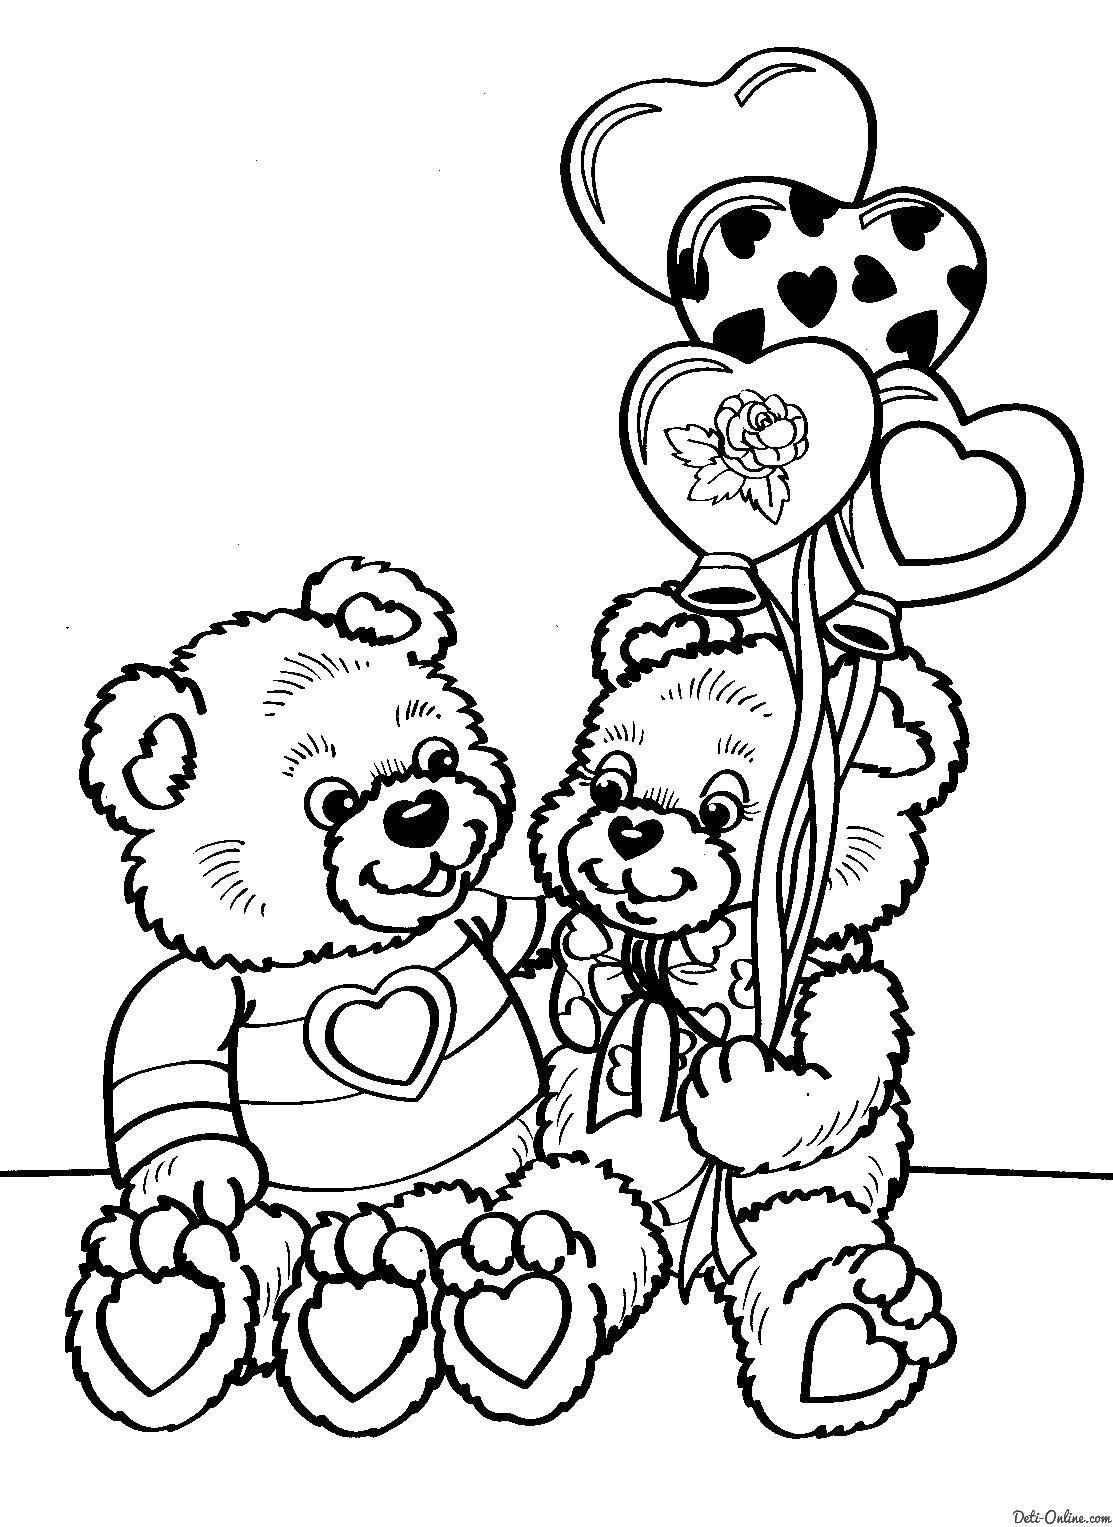 Coloring Bears with balloons. Category Valentines day. Tags:  the bears, balls, coloring books.